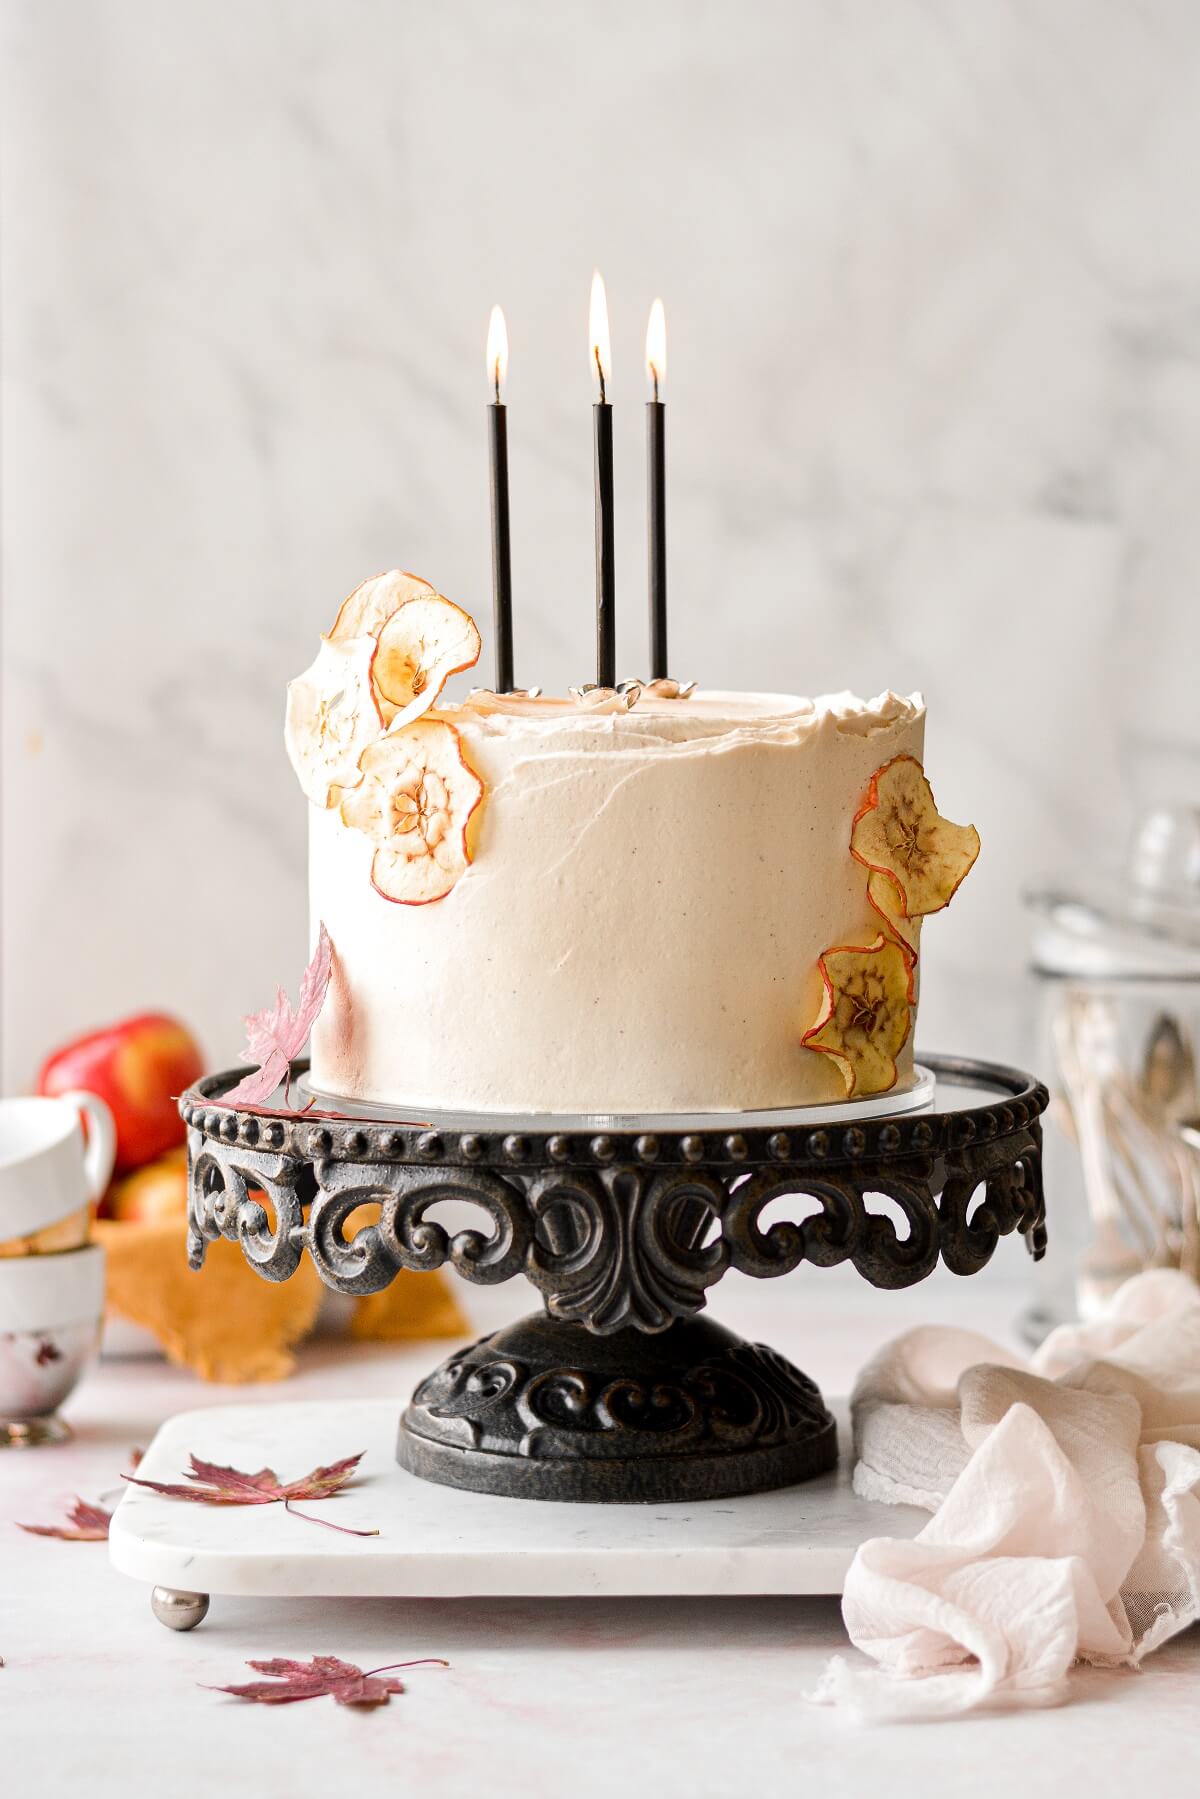 Apple cider cake with maple vanilla bean buttercream, with dried apples garnish and black candles.